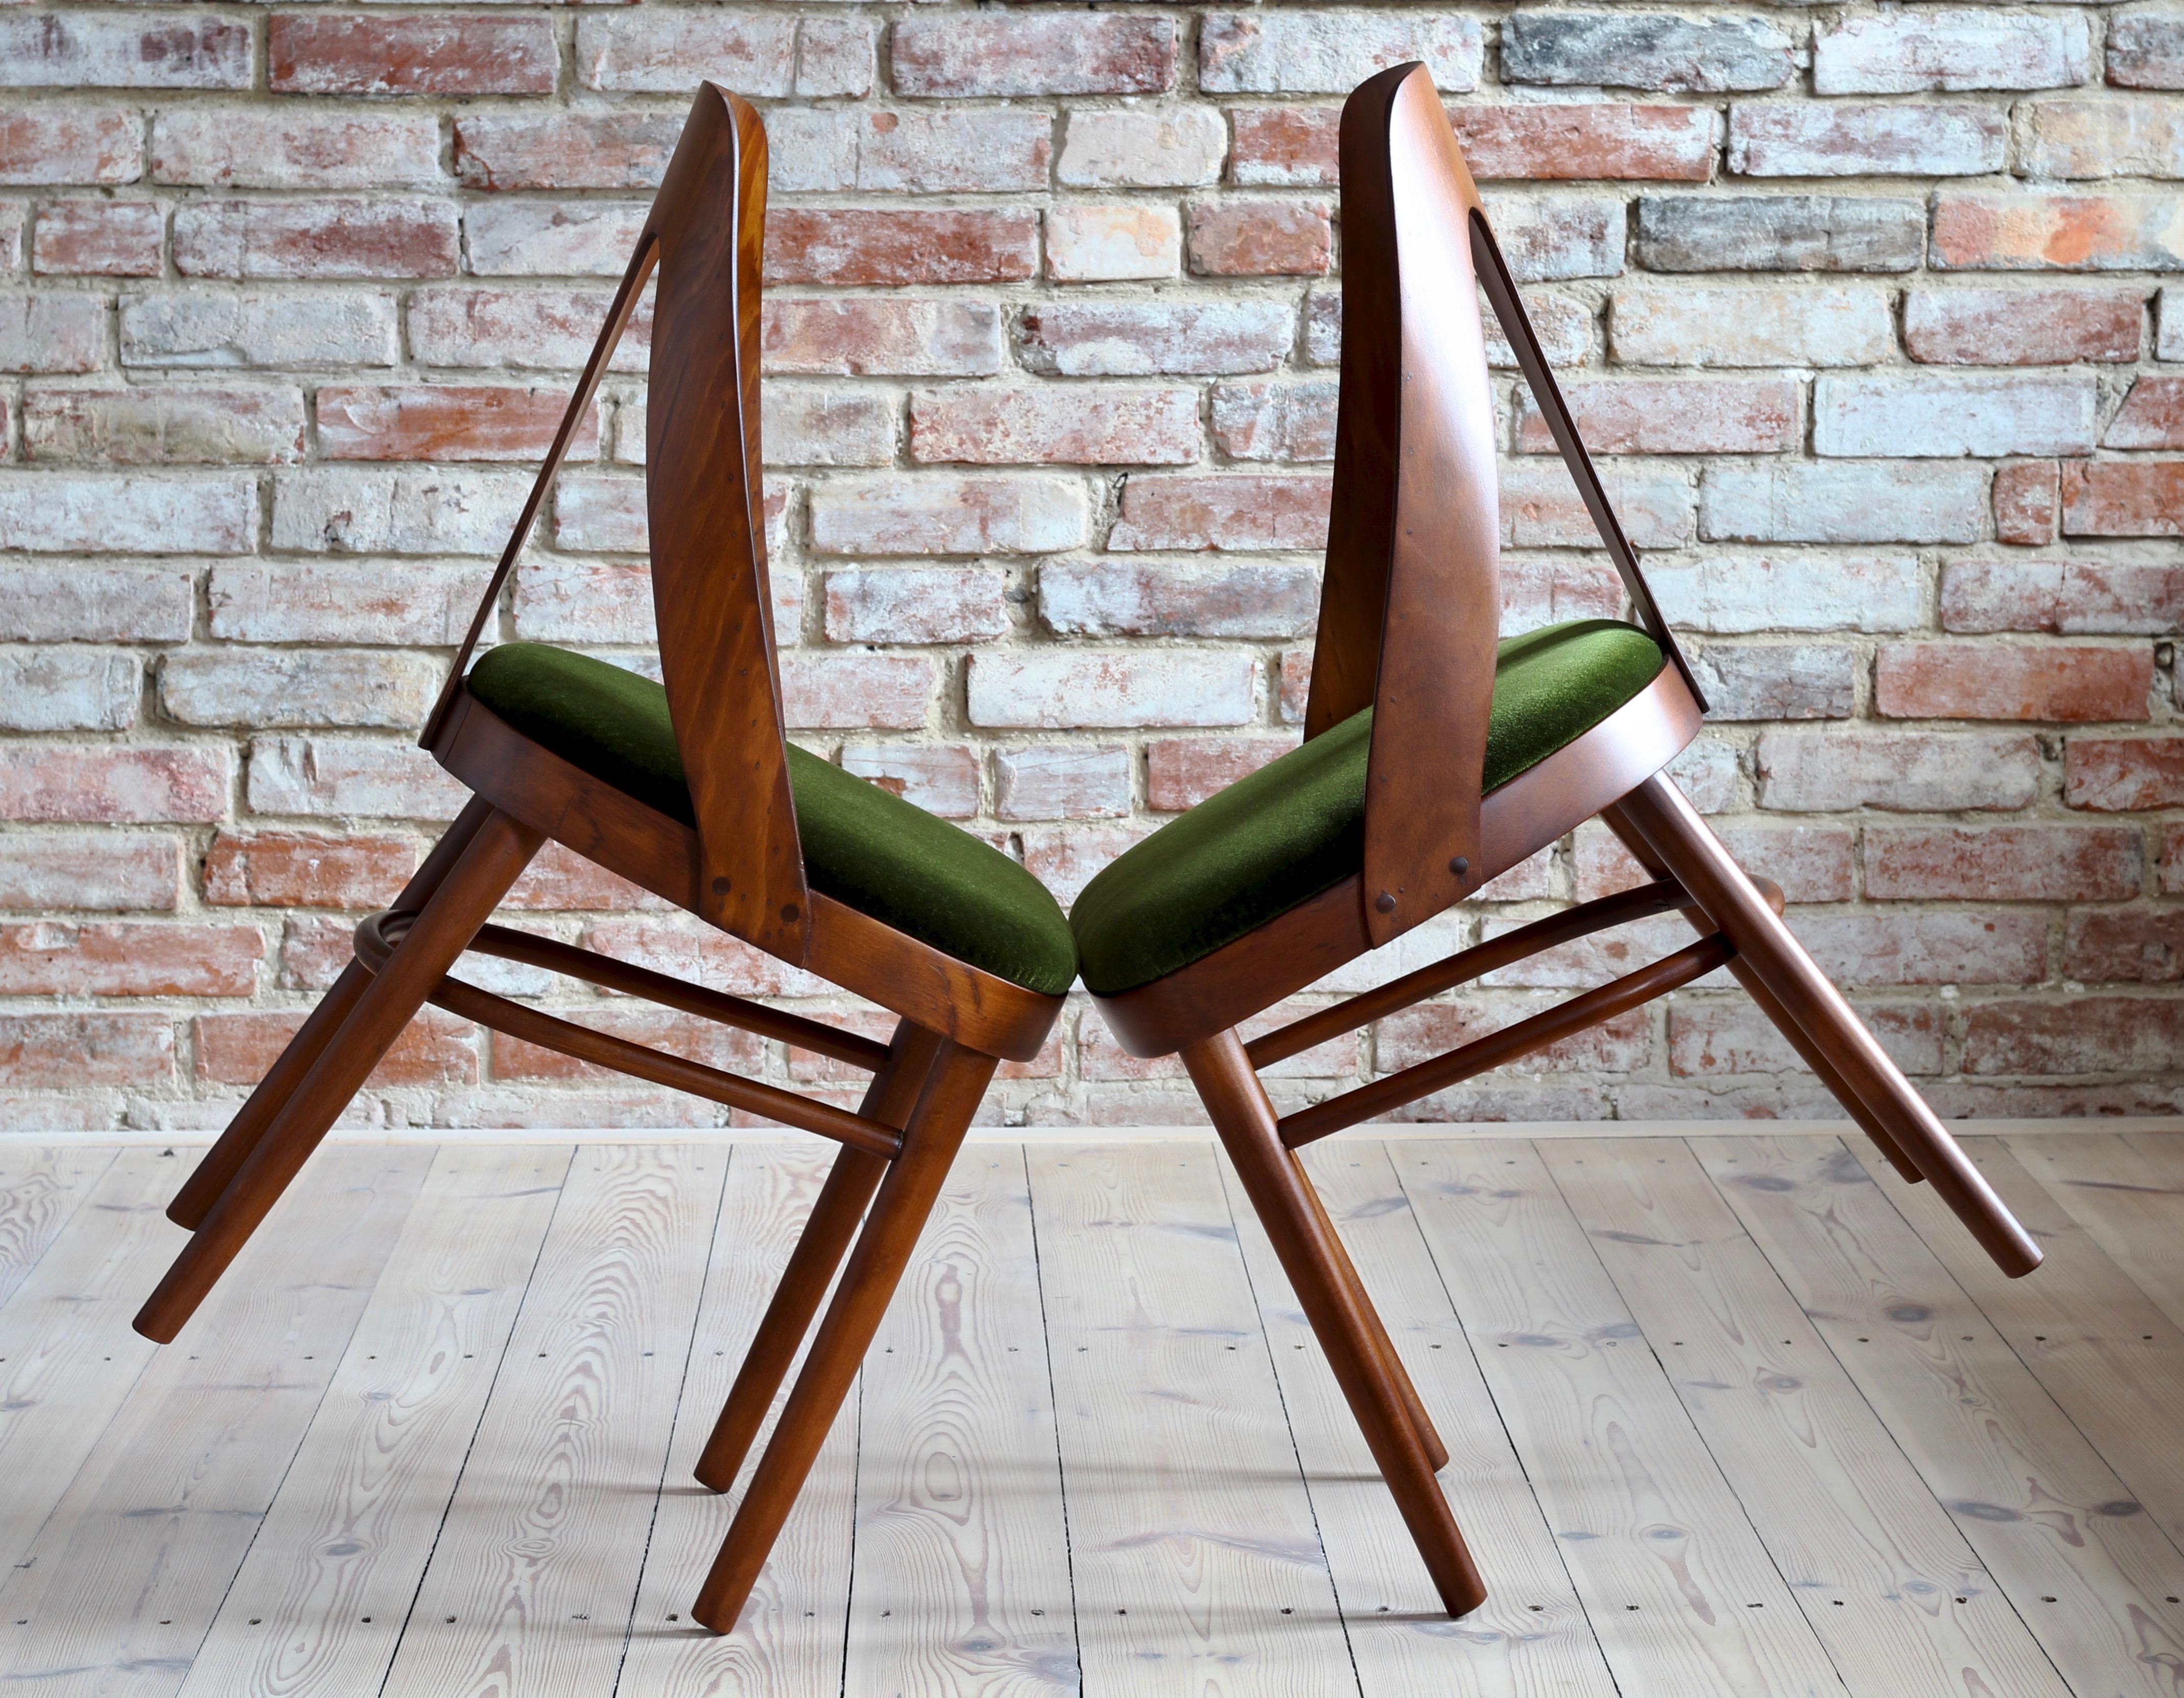 These chairs were produced in the 1950s in a well-known Bentwood Furniture Factory in Radomsko, Poland. Out of the many models that were made in Fameg back in those days, the A6070 chairs Stand out with a stabile construction and their extremely